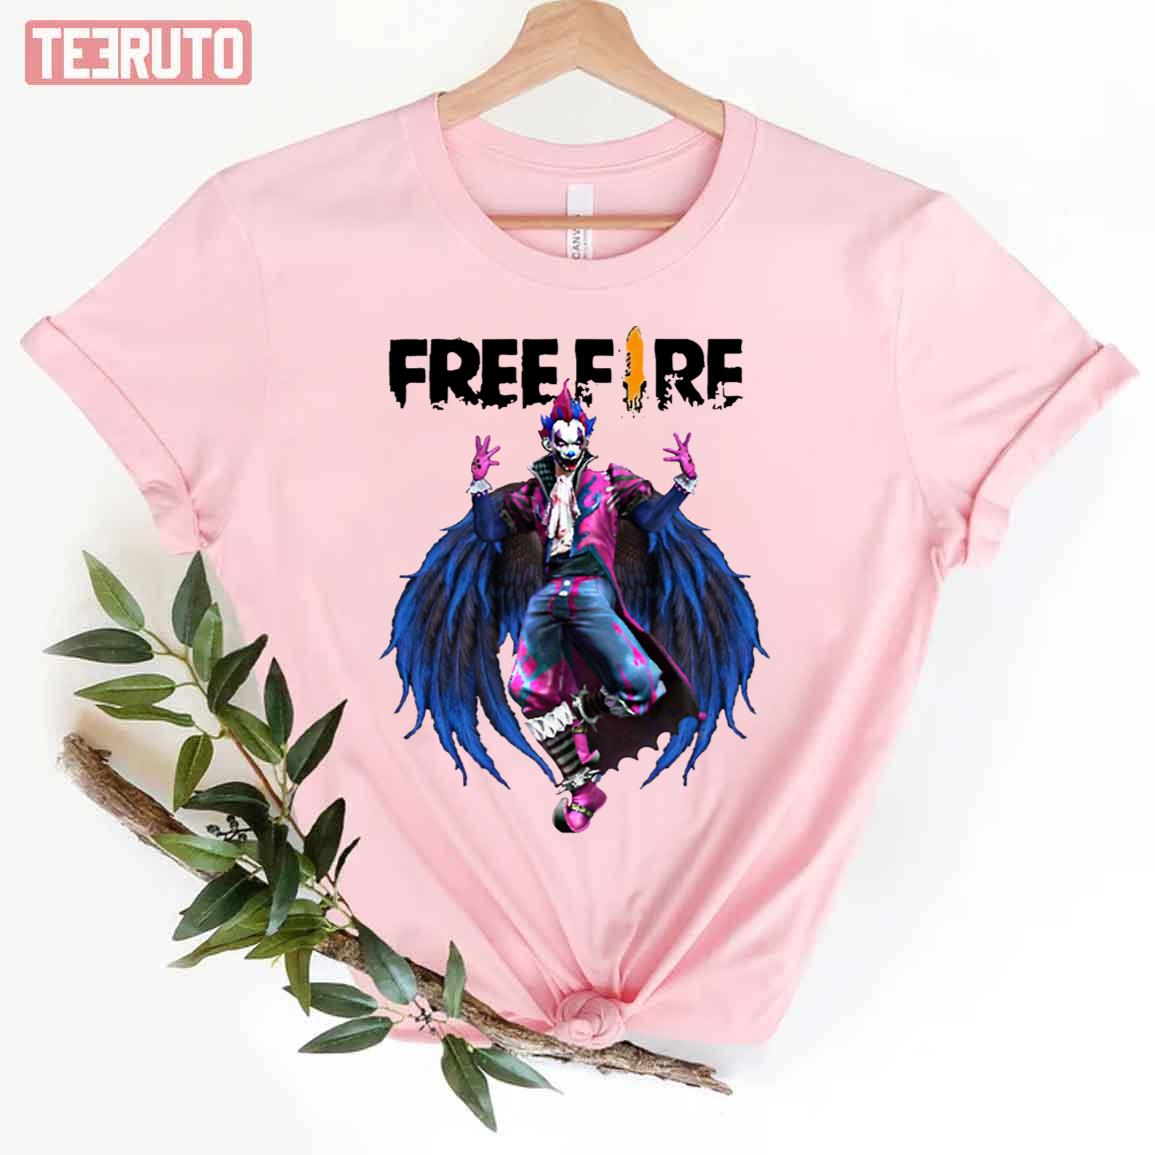 The Bad Guy Garena Free Fire Unisex T-Shirt